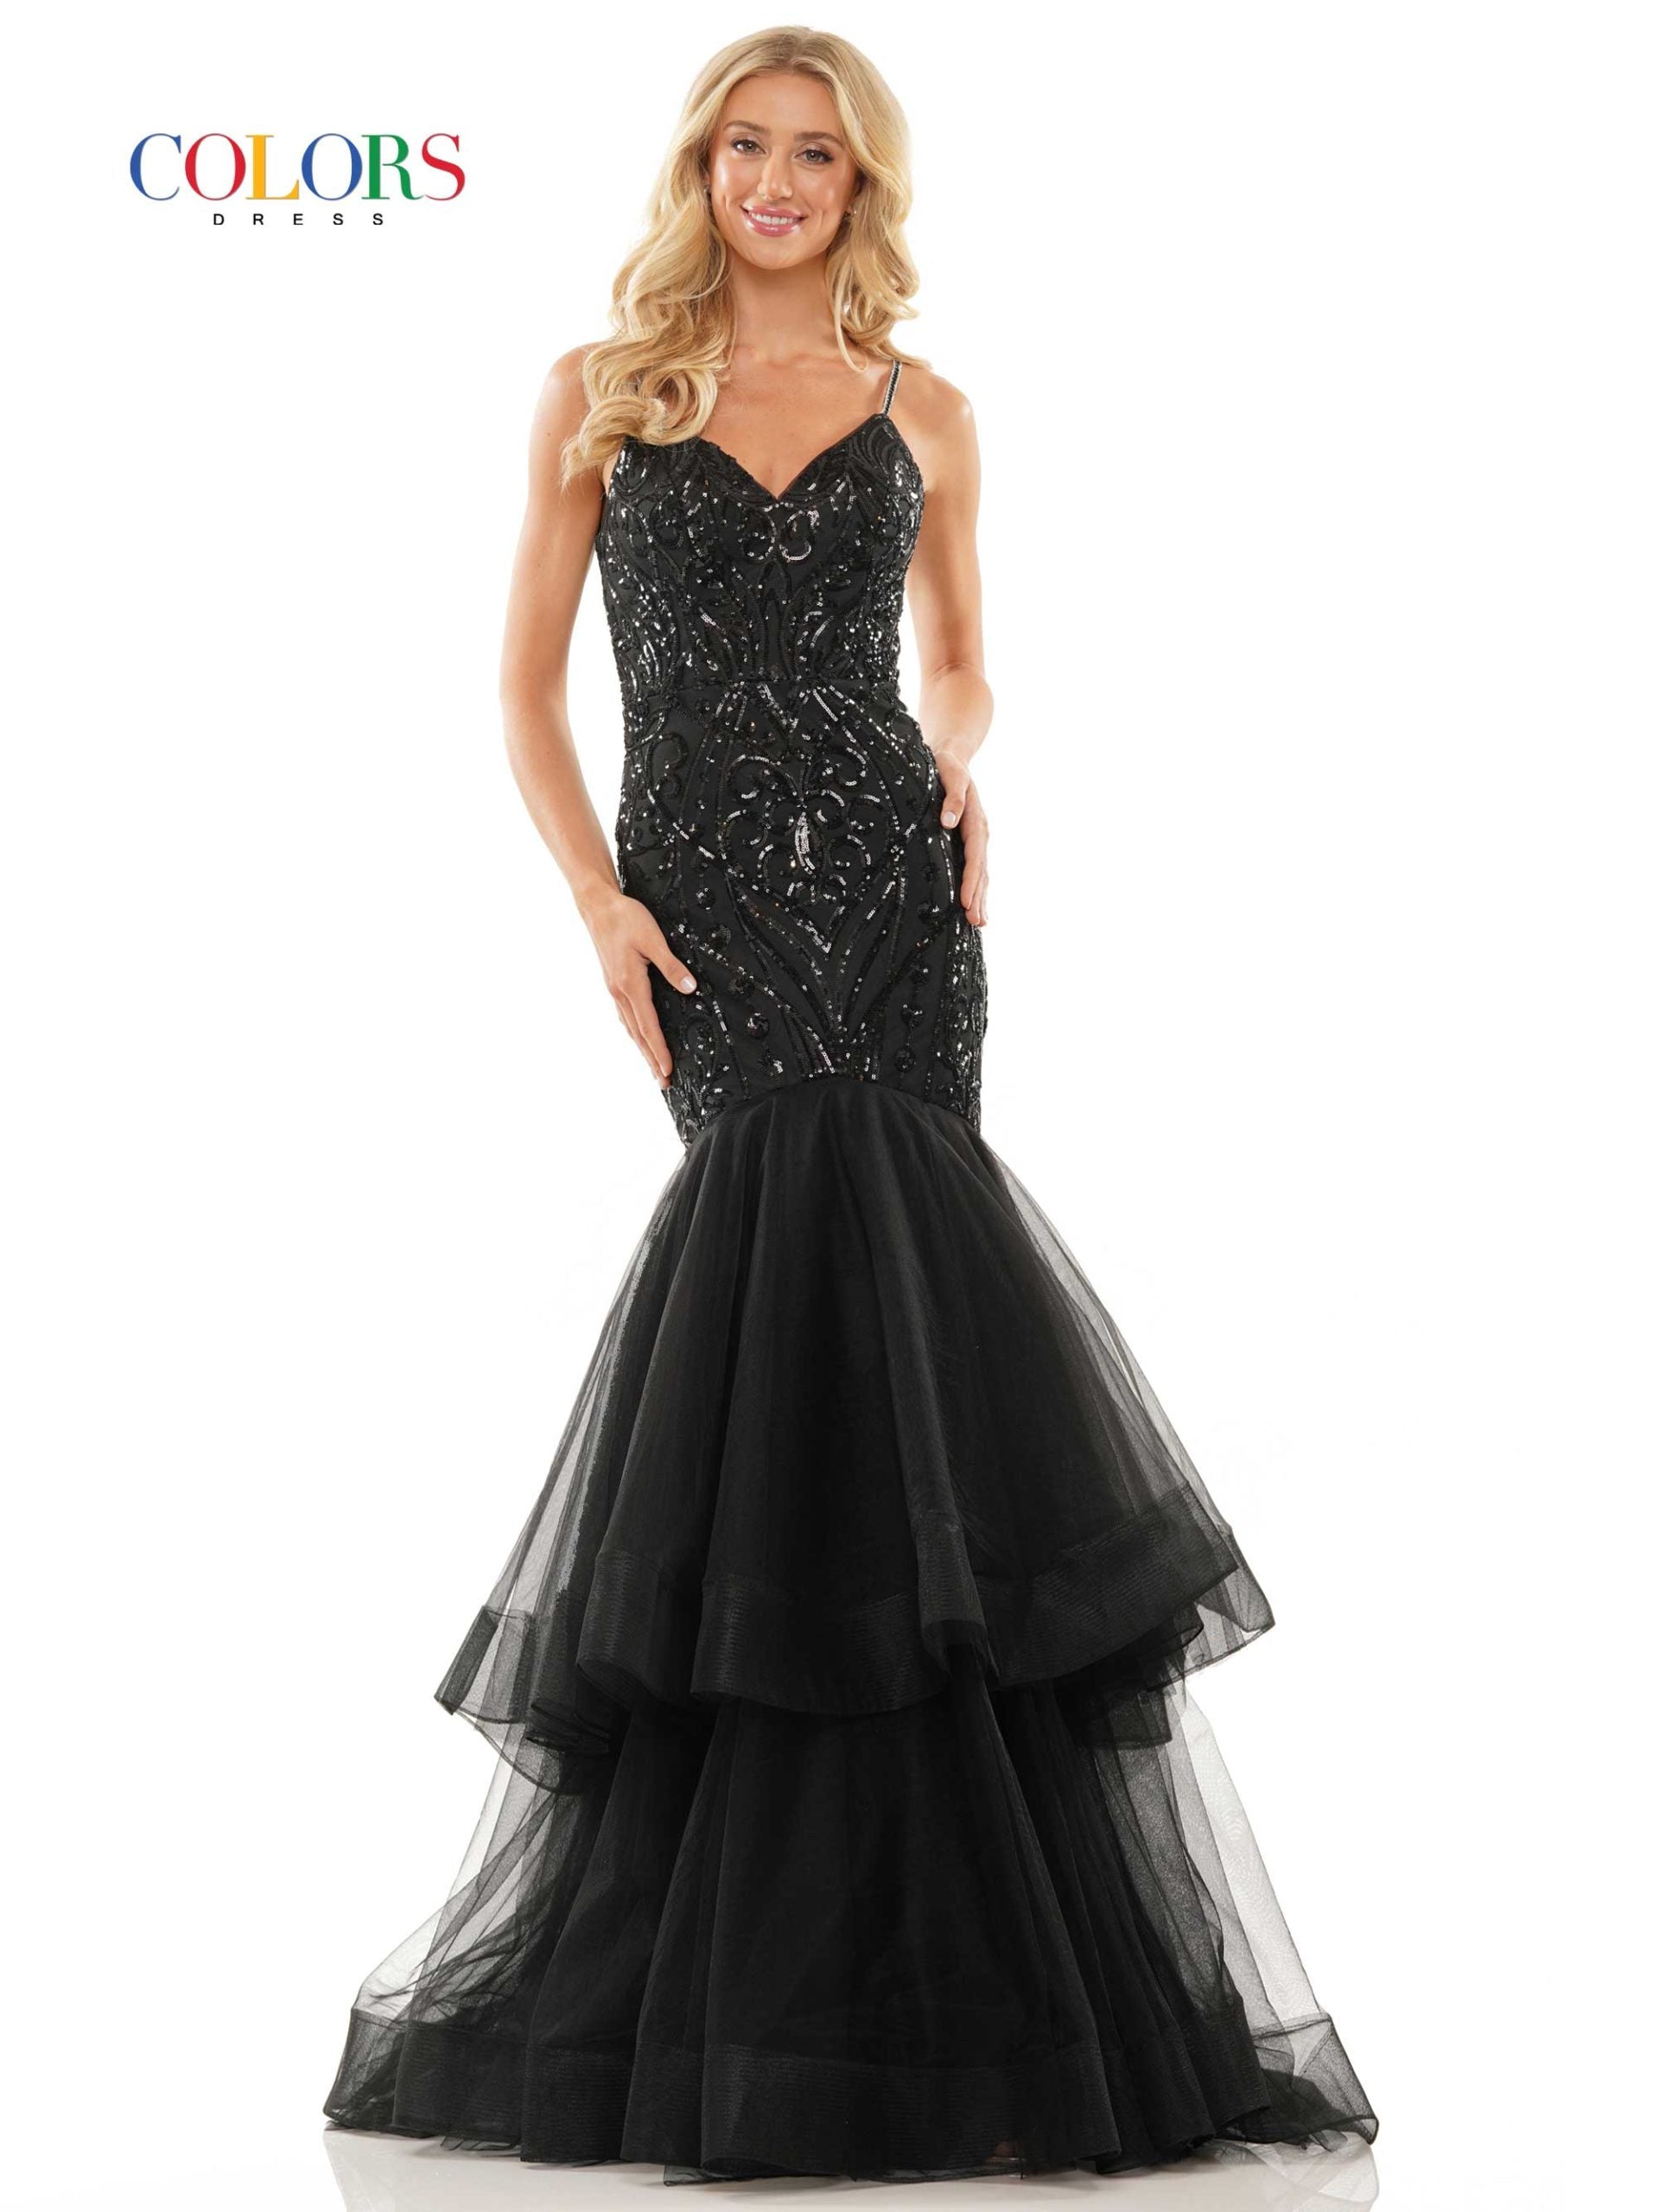 Colors Dress 2978 Fitted Sequin Mermaid Prom Dress Ruffle Layer Formal Gown Corset Back   Color: Black, Royal, Hot Pink, Turquoise Size: 0-22